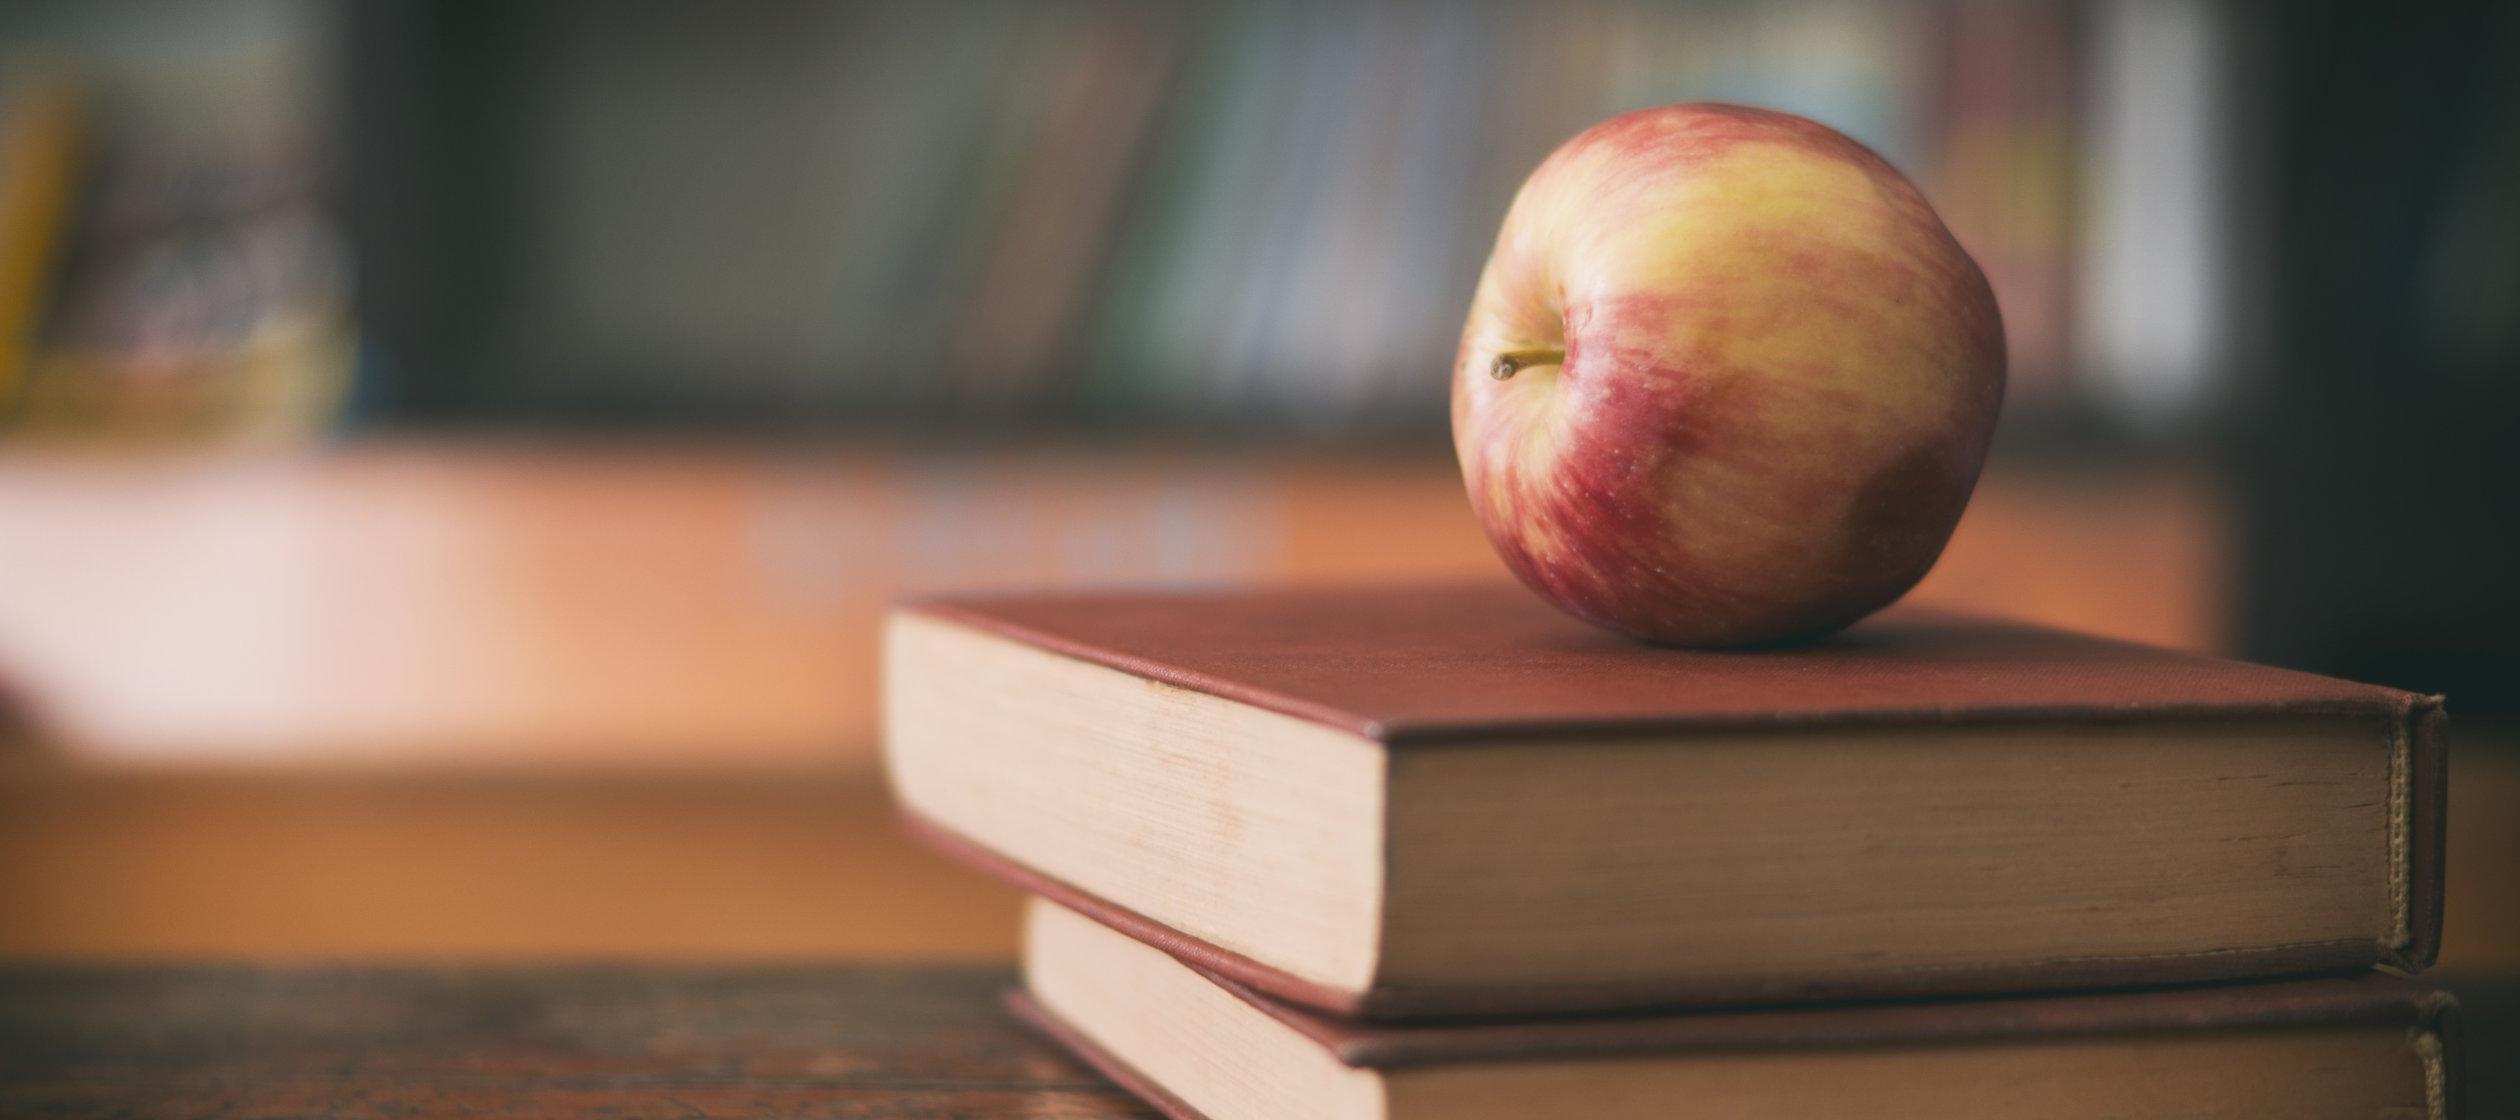 Apple sitting on a pile of books on a classroom desk.